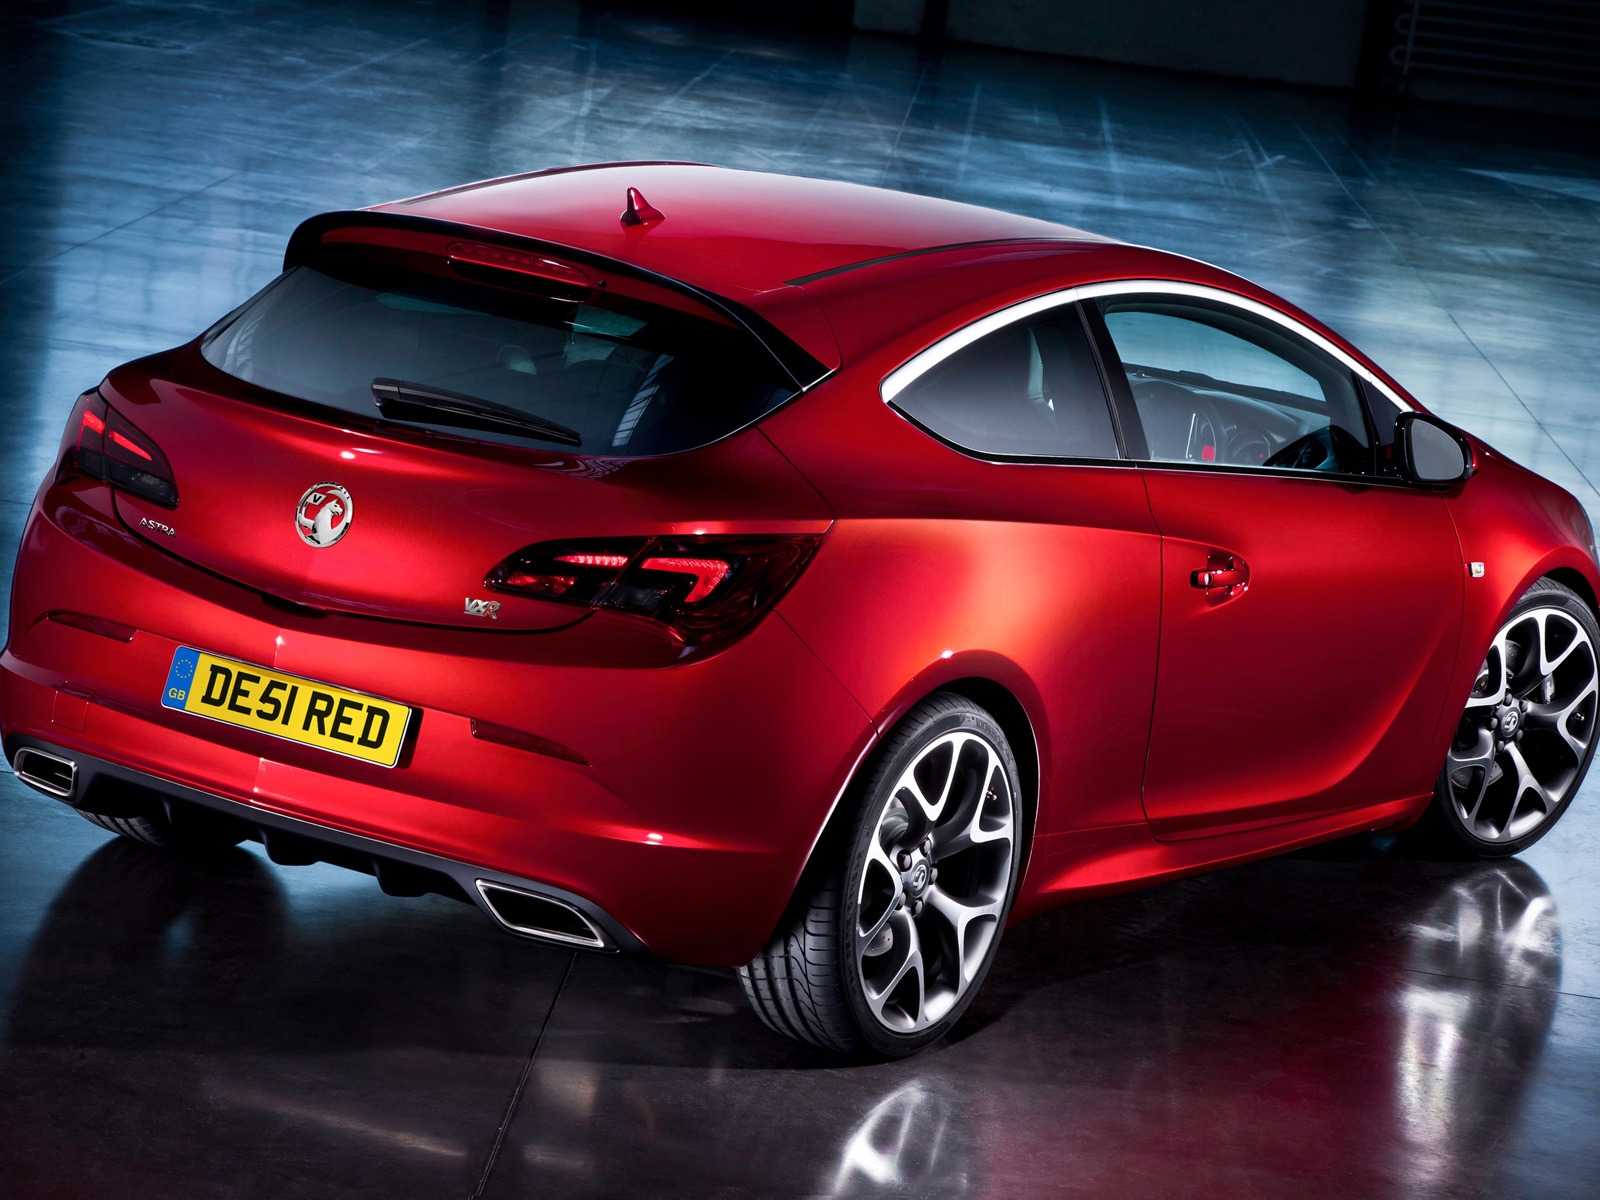 Vauxhall Astra GTC Rear for 1600 x 1200 resolution